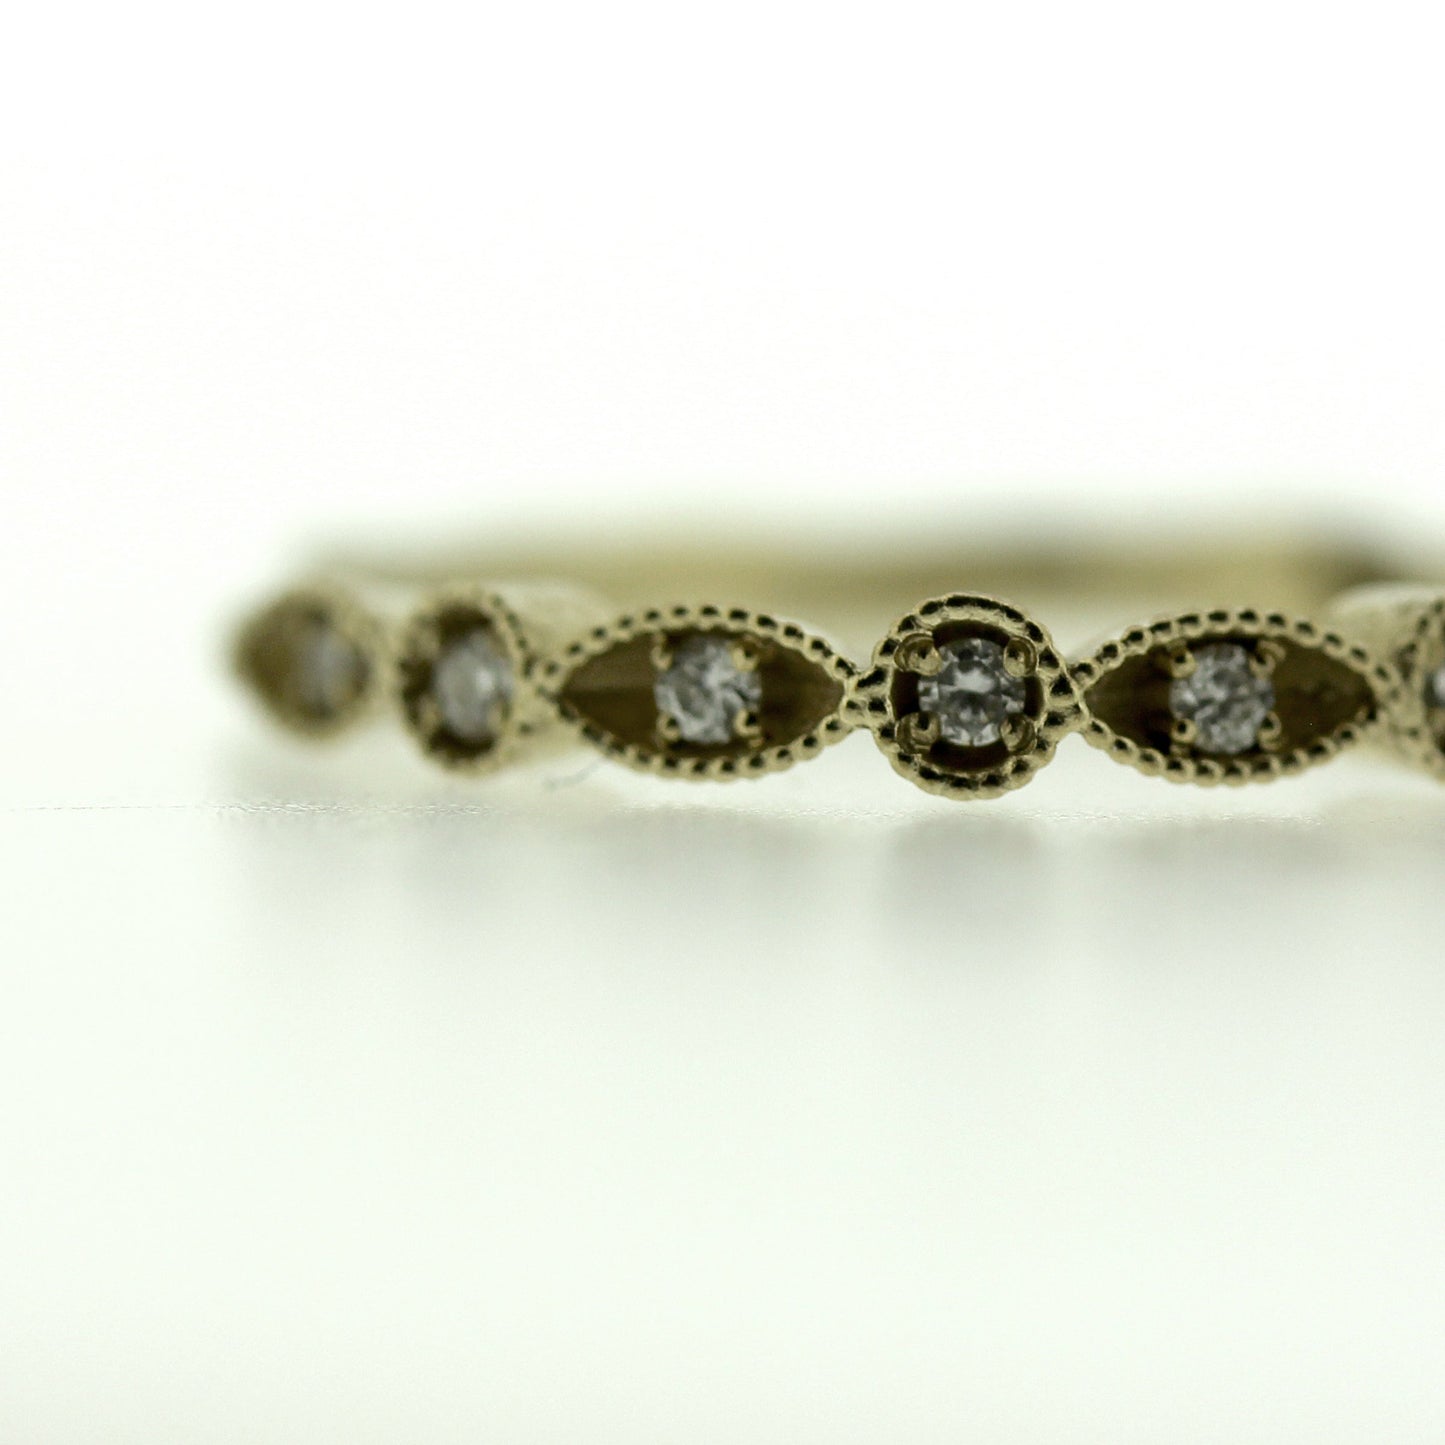 Close up view of Chloe Band. This ring is made of gold, has a hand carved design and set diamonds throughout the band.